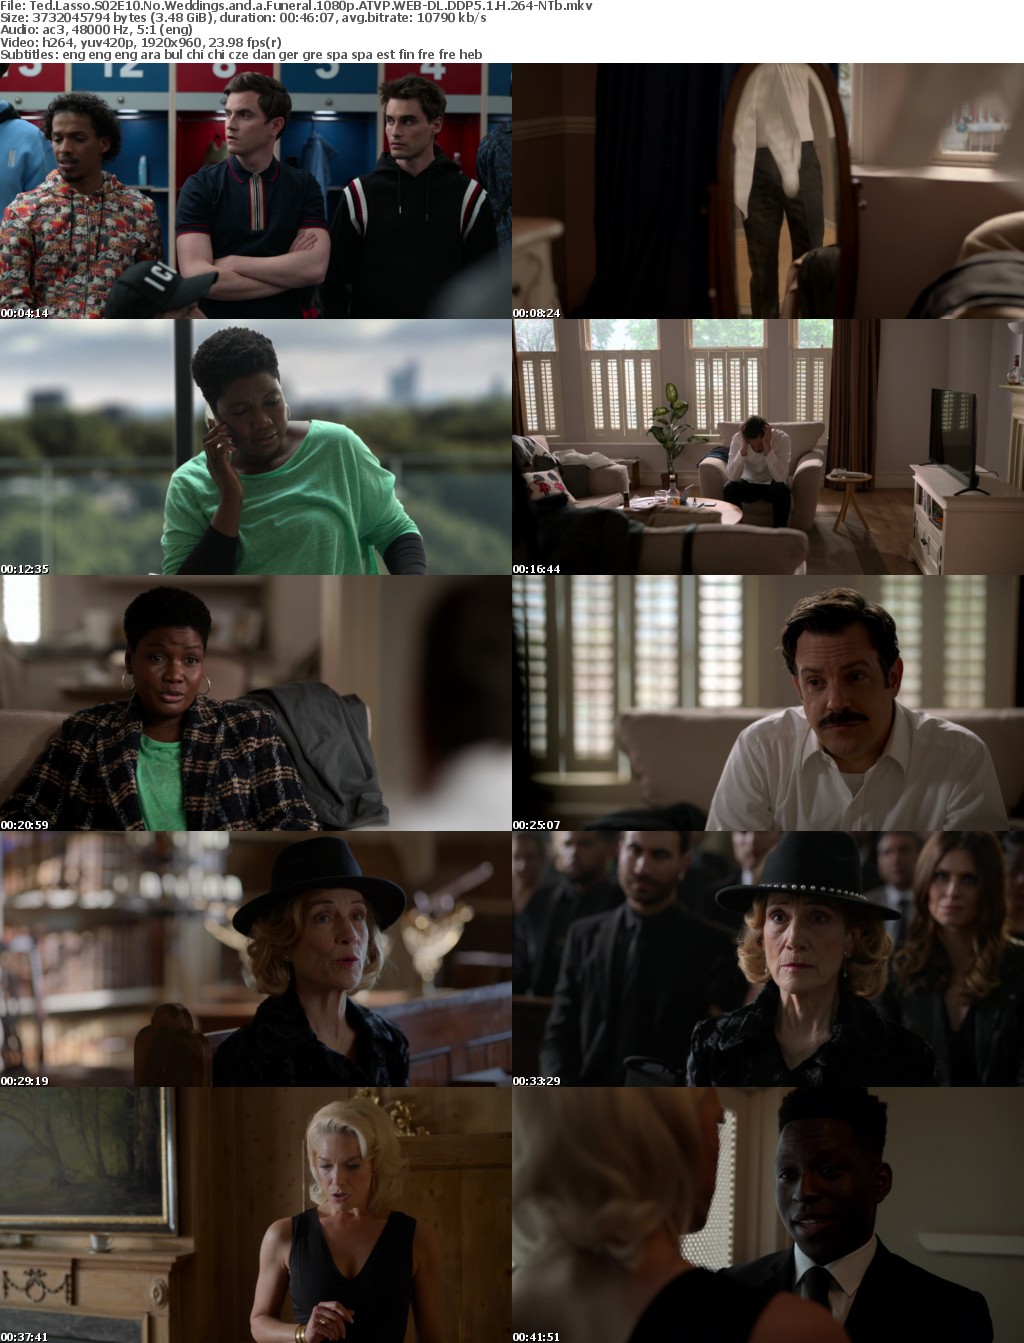 Ted Lasso S02E10 No Weddings and a Funeral 1080p ATVP WEBRip DDP5 1 x264-NTb